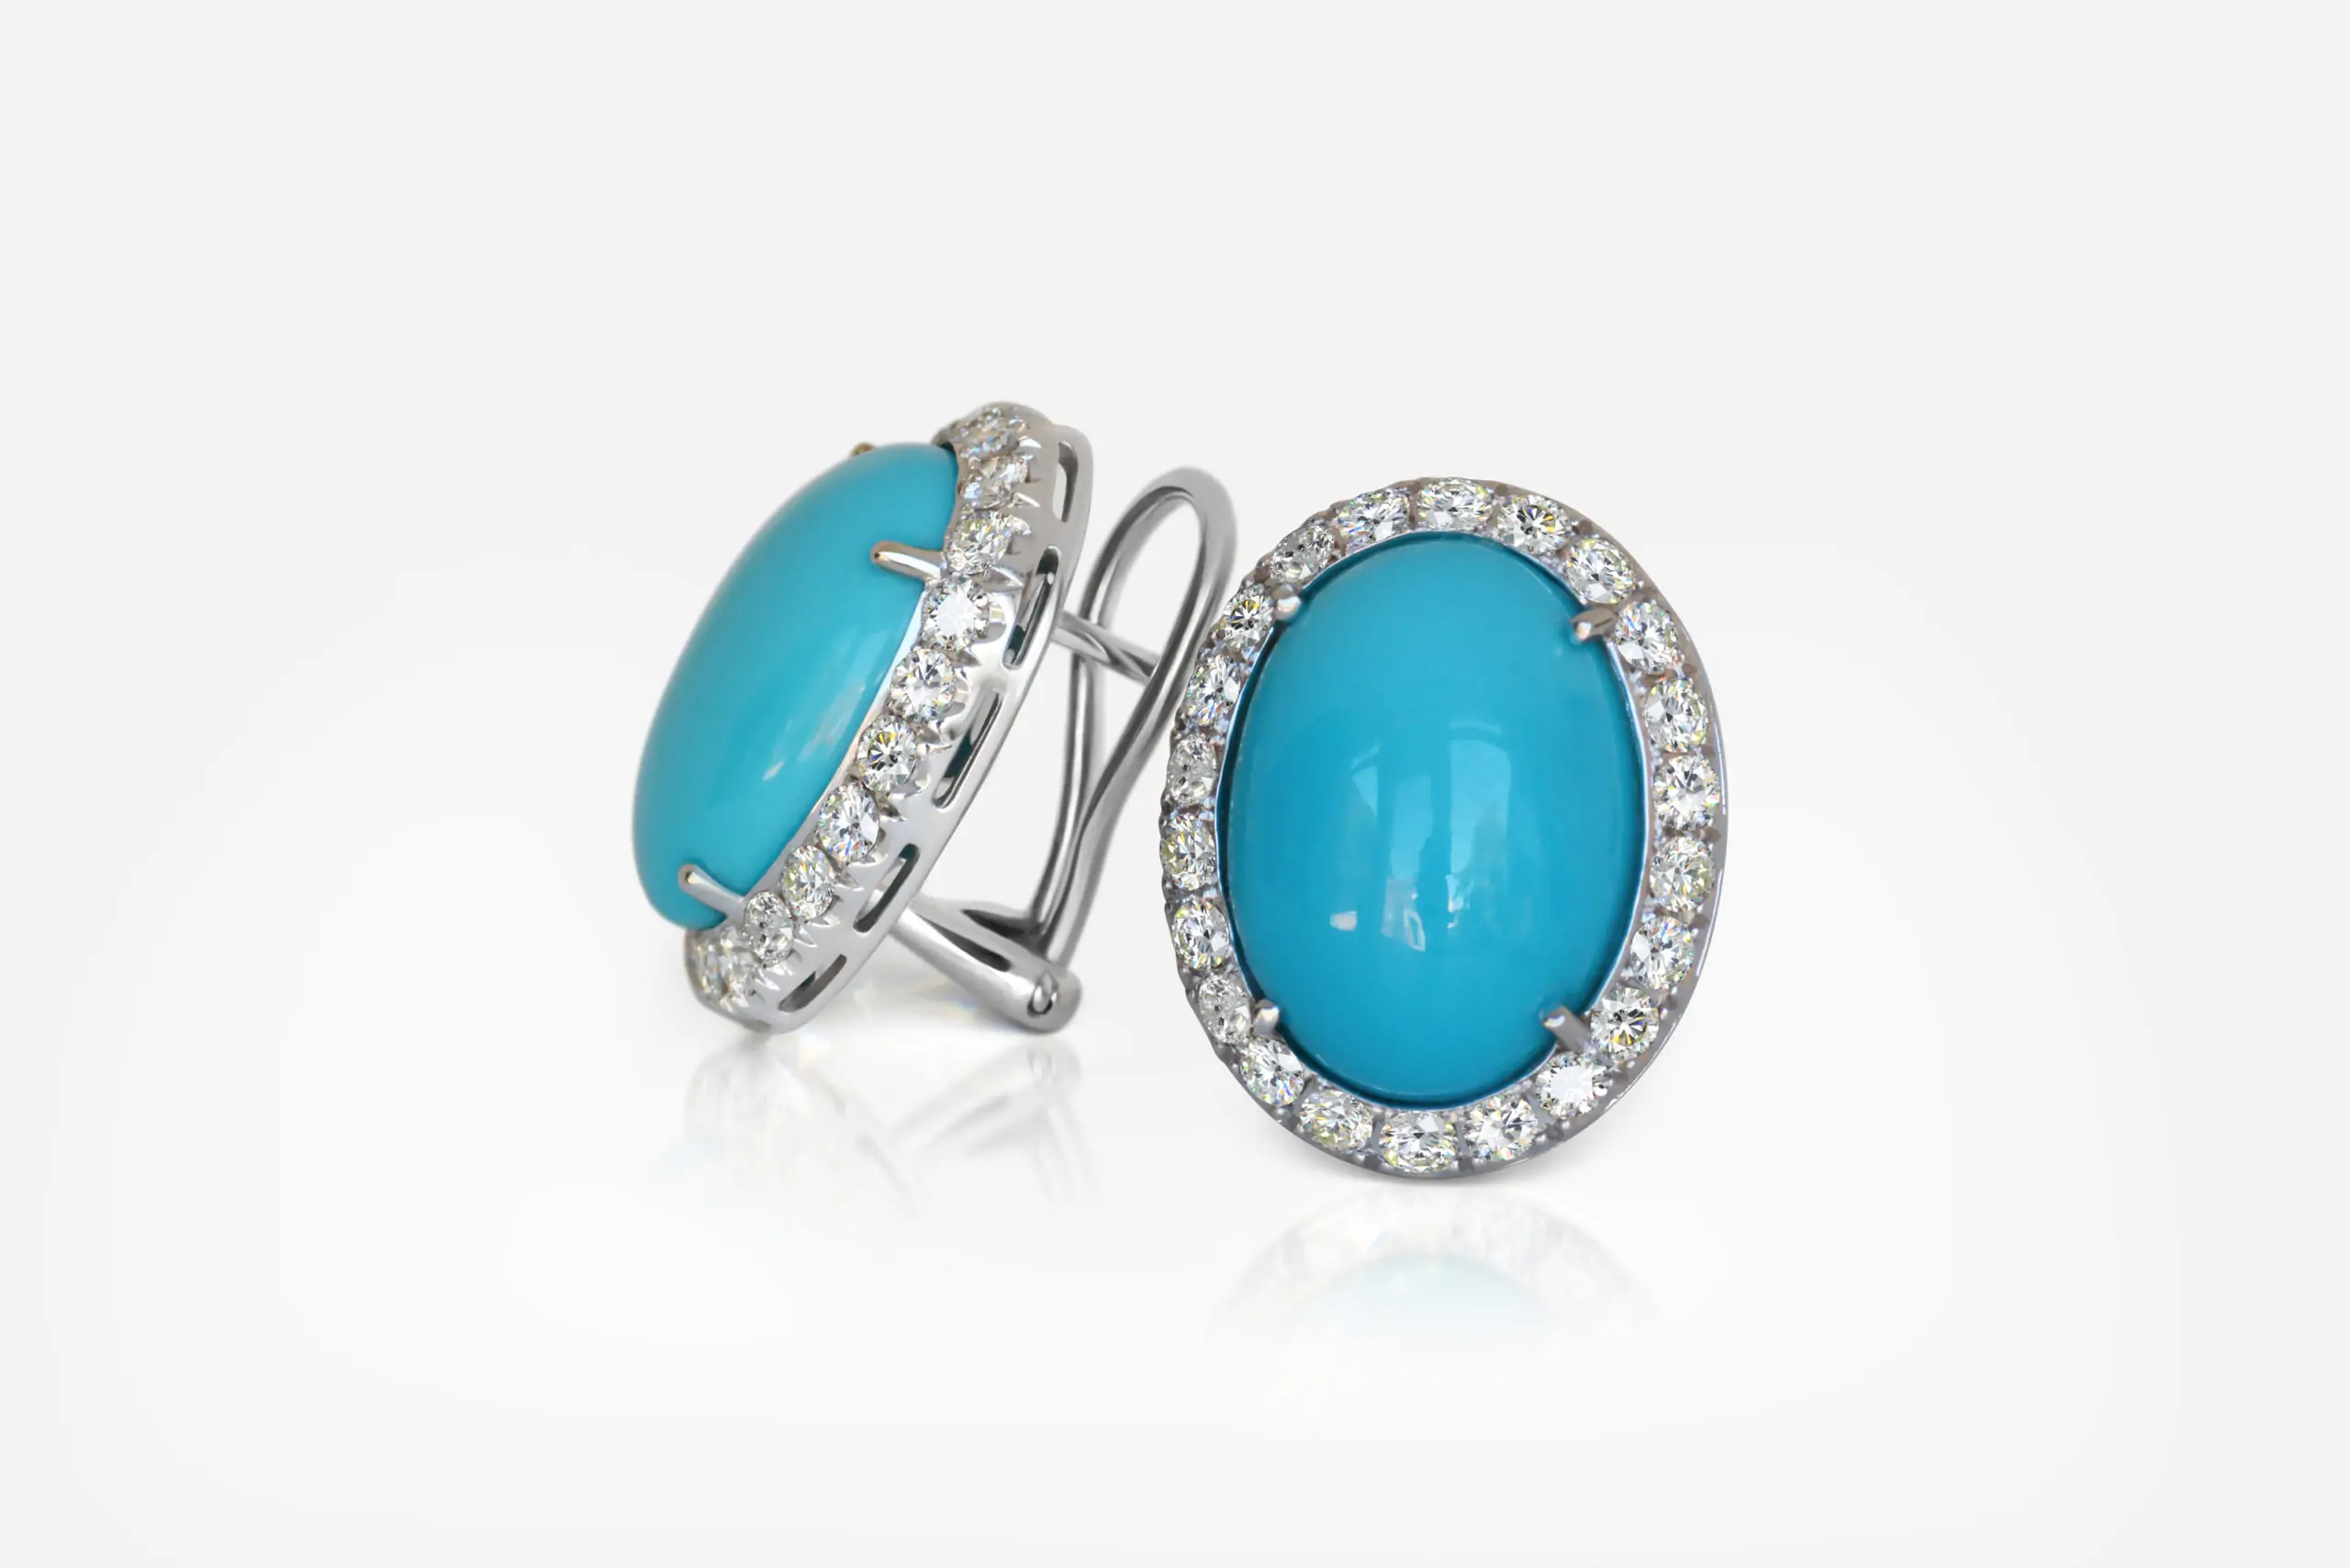 Turquoise Earrings - thumb picture 1